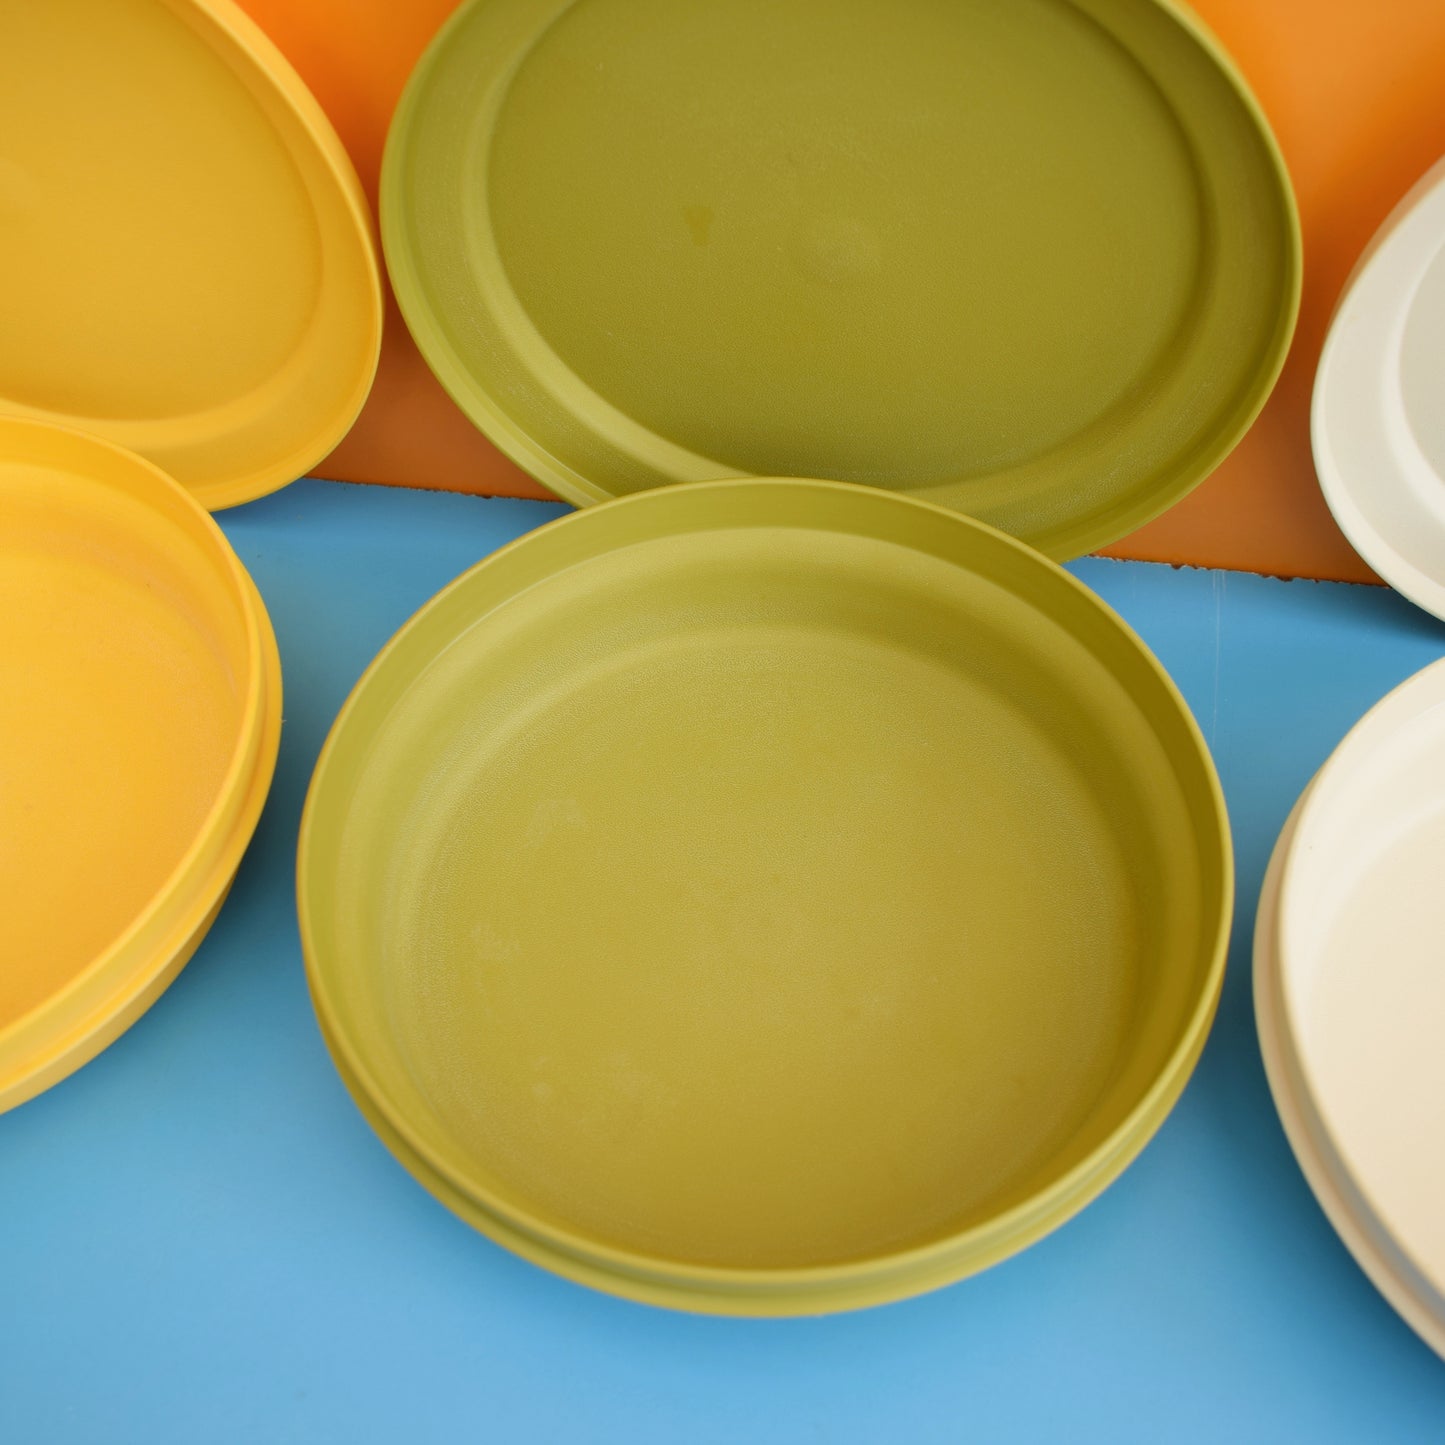 Vintage 1970s Tupperware Bowls/ Plates / Containers